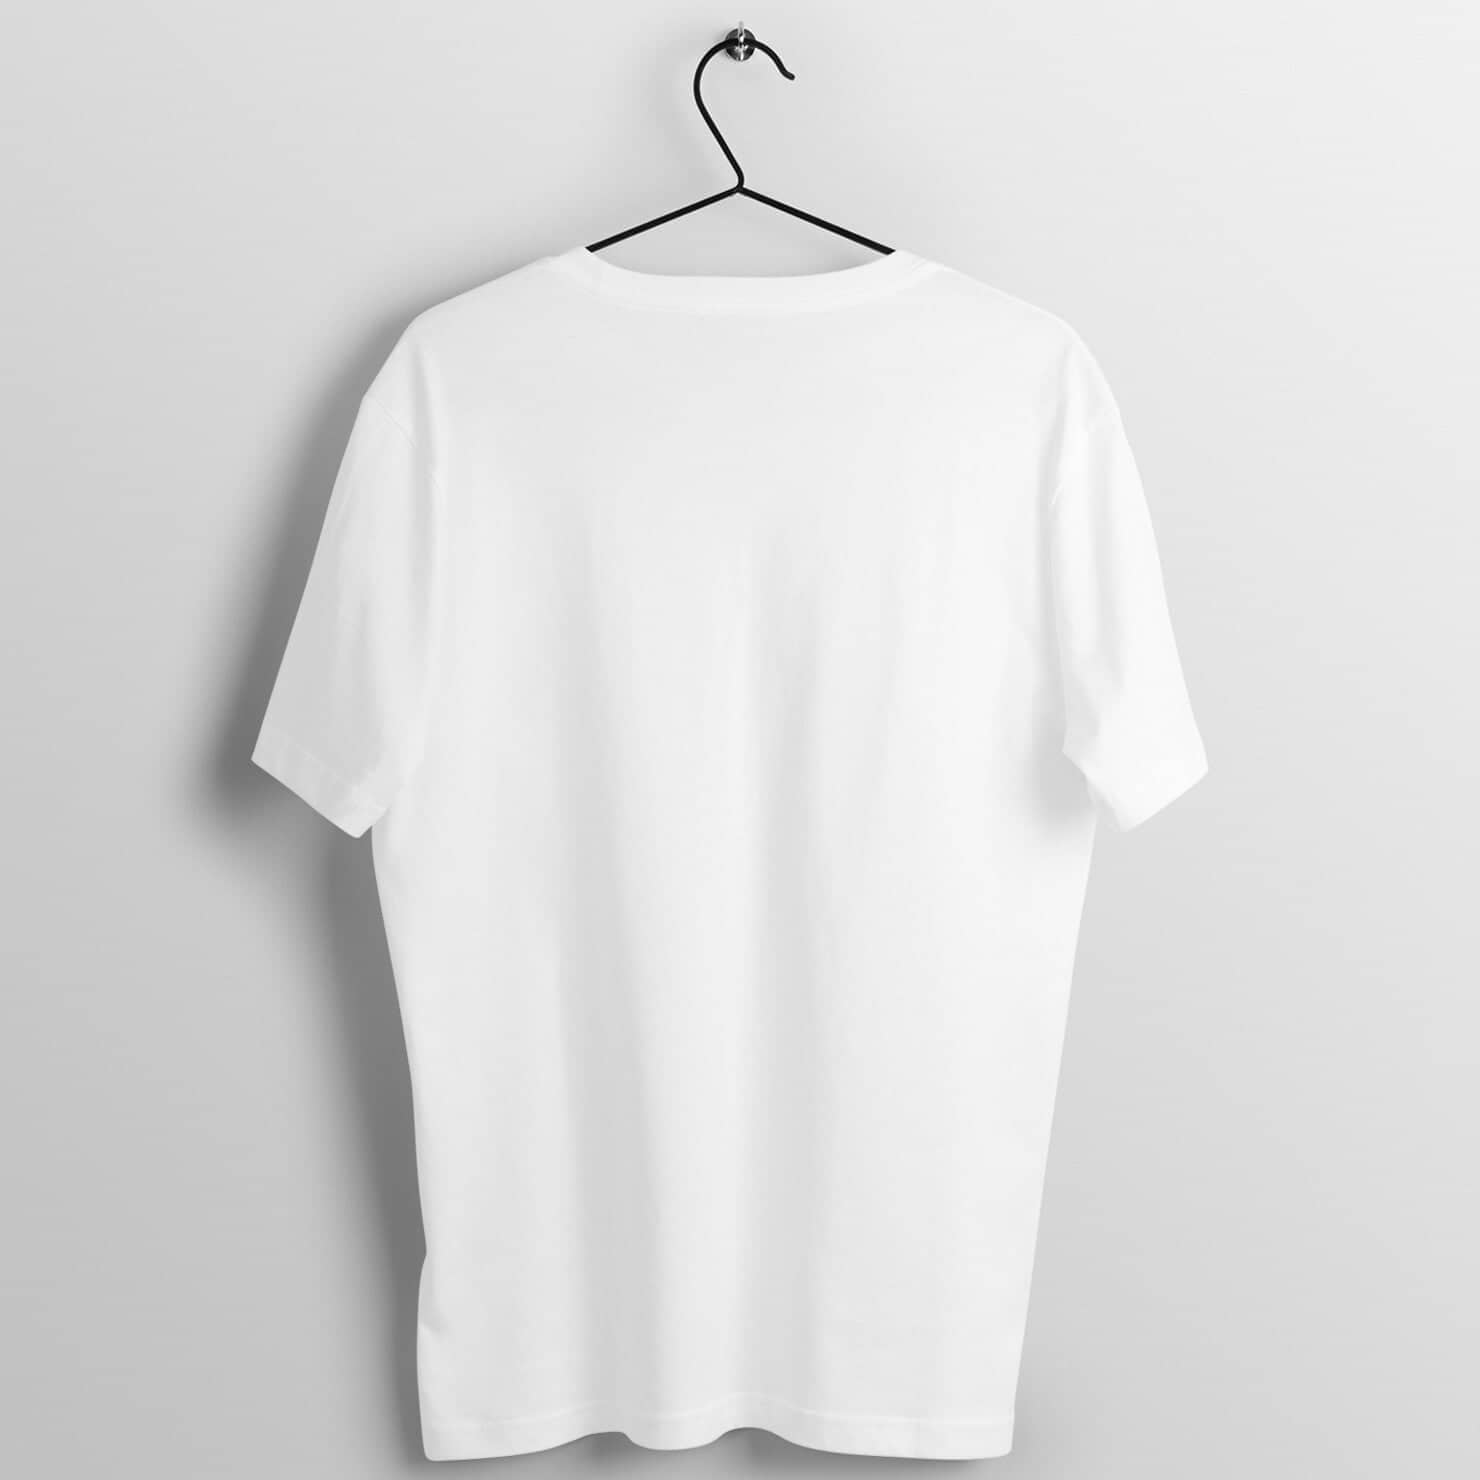 Classy Sassy & A Bit Smart Assy Exclusive White T Shirt for Women freeshipping - Catch My Drift India